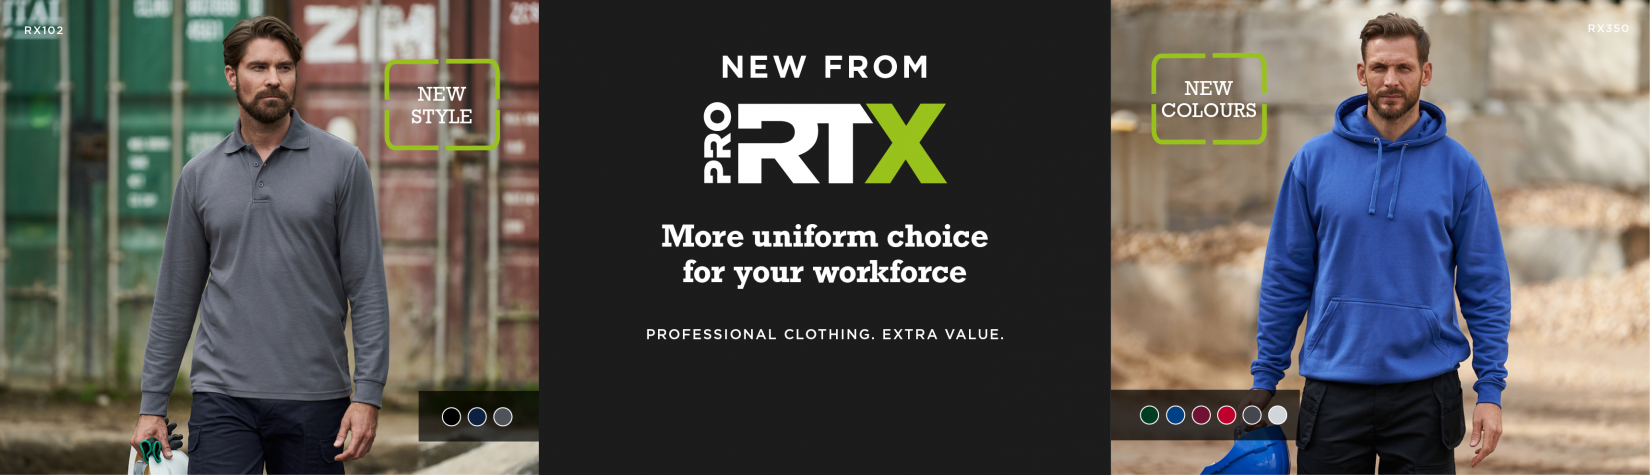 full-collection-pro-rtx